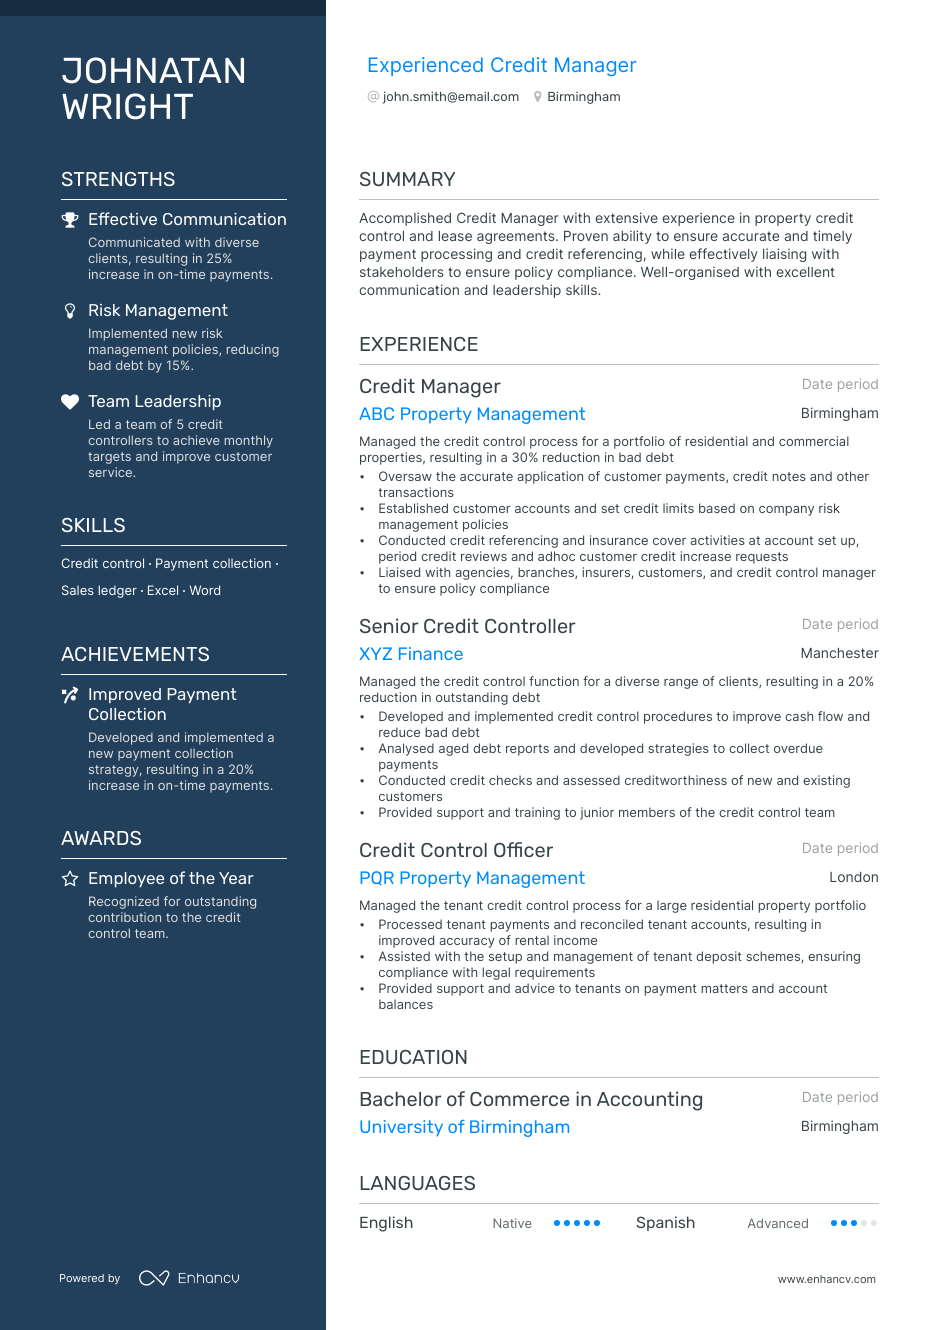 Elevate Your Profile with Publications on Resume [+ Formats & Examples]